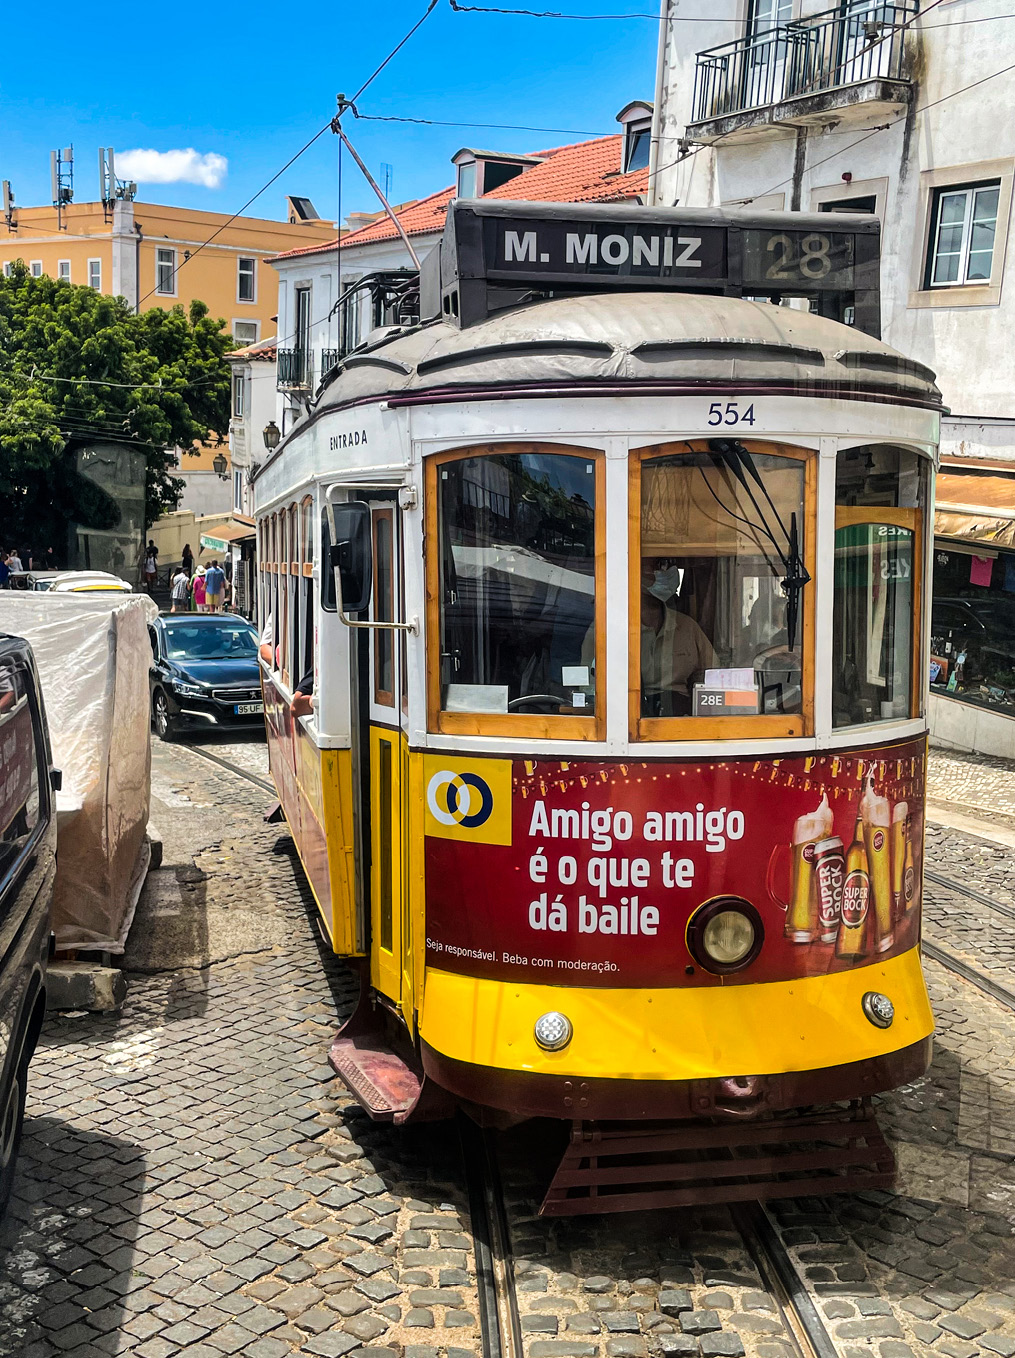 Tram 28 is a commuter trolley for workers and shoppers and a great way for tourists to get a glimpse of life in old Lisbon’s neighborhoods.